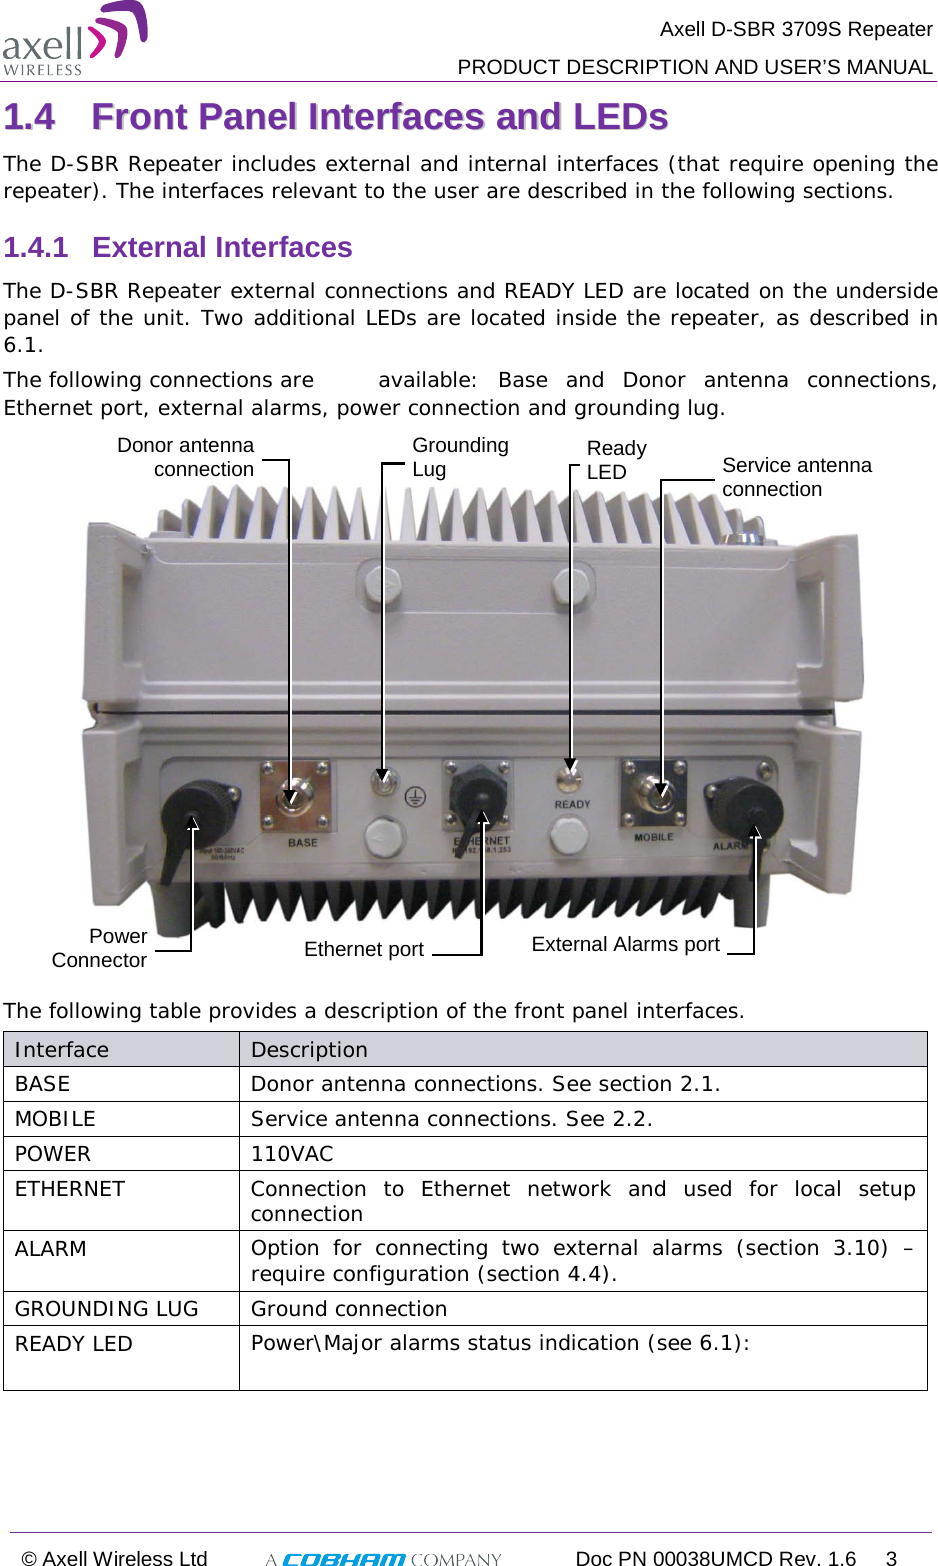  Axell D-SBR 3709S Repeater  PRODUCT DESCRIPTION AND USER’S MANUAL  © Axell Wireless Ltd  Doc PN 00038UMCD Rev. 1.6  3  11..44  FFrroonntt  PPaanneell  IInntteerrffaacceess  aanndd  LLEEDDss  The D-SBR Repeater includes external and internal interfaces (that require opening the repeater). The interfaces relevant to the user are described in the following sections. 1.4.1  External Interfaces The D-SBR Repeater external connections and READY LED are located on the underside panel of the unit. Two additional LEDs are located inside the repeater, as described in  6.1. The following connections are  available: Base and Donor antenna connections, Ethernet port, external alarms, power connection and grounding lug.    The following table provides a description of the front panel interfaces. Interface Description BASE  Donor antenna connections. See section  2.1. MOBILE Service antenna connections. See  2.2. POWER 110VAC  ETHERNET Connection to Ethernet network and used for local setup connection ALARM Option for connecting two external alarms (section  3.10)  – require configuration (section  4.4).  GROUNDING LUG Ground connection READY LED Power\Major alarms status indication (see  6.1):   Service antenna connection Donor antenna connection External Alarms port Power Connector Ethernet port Grounding Lug Ready LED   